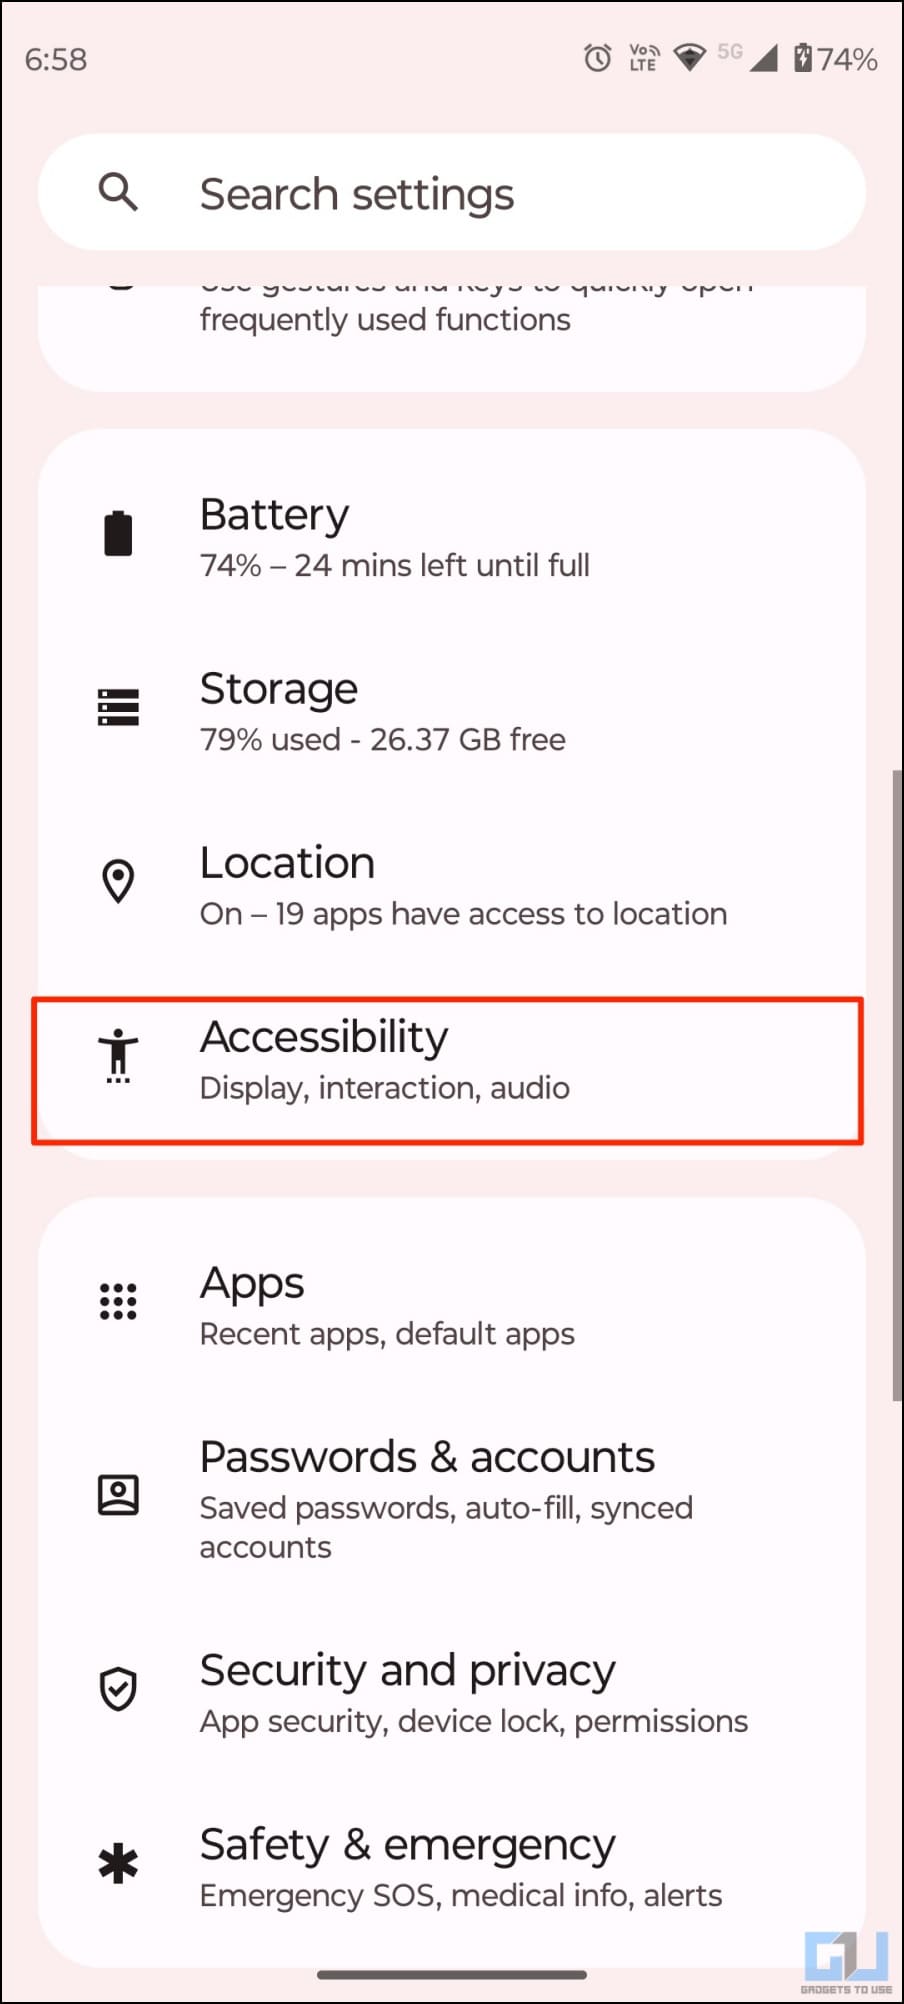 Enable Magnification Accessibility on Android